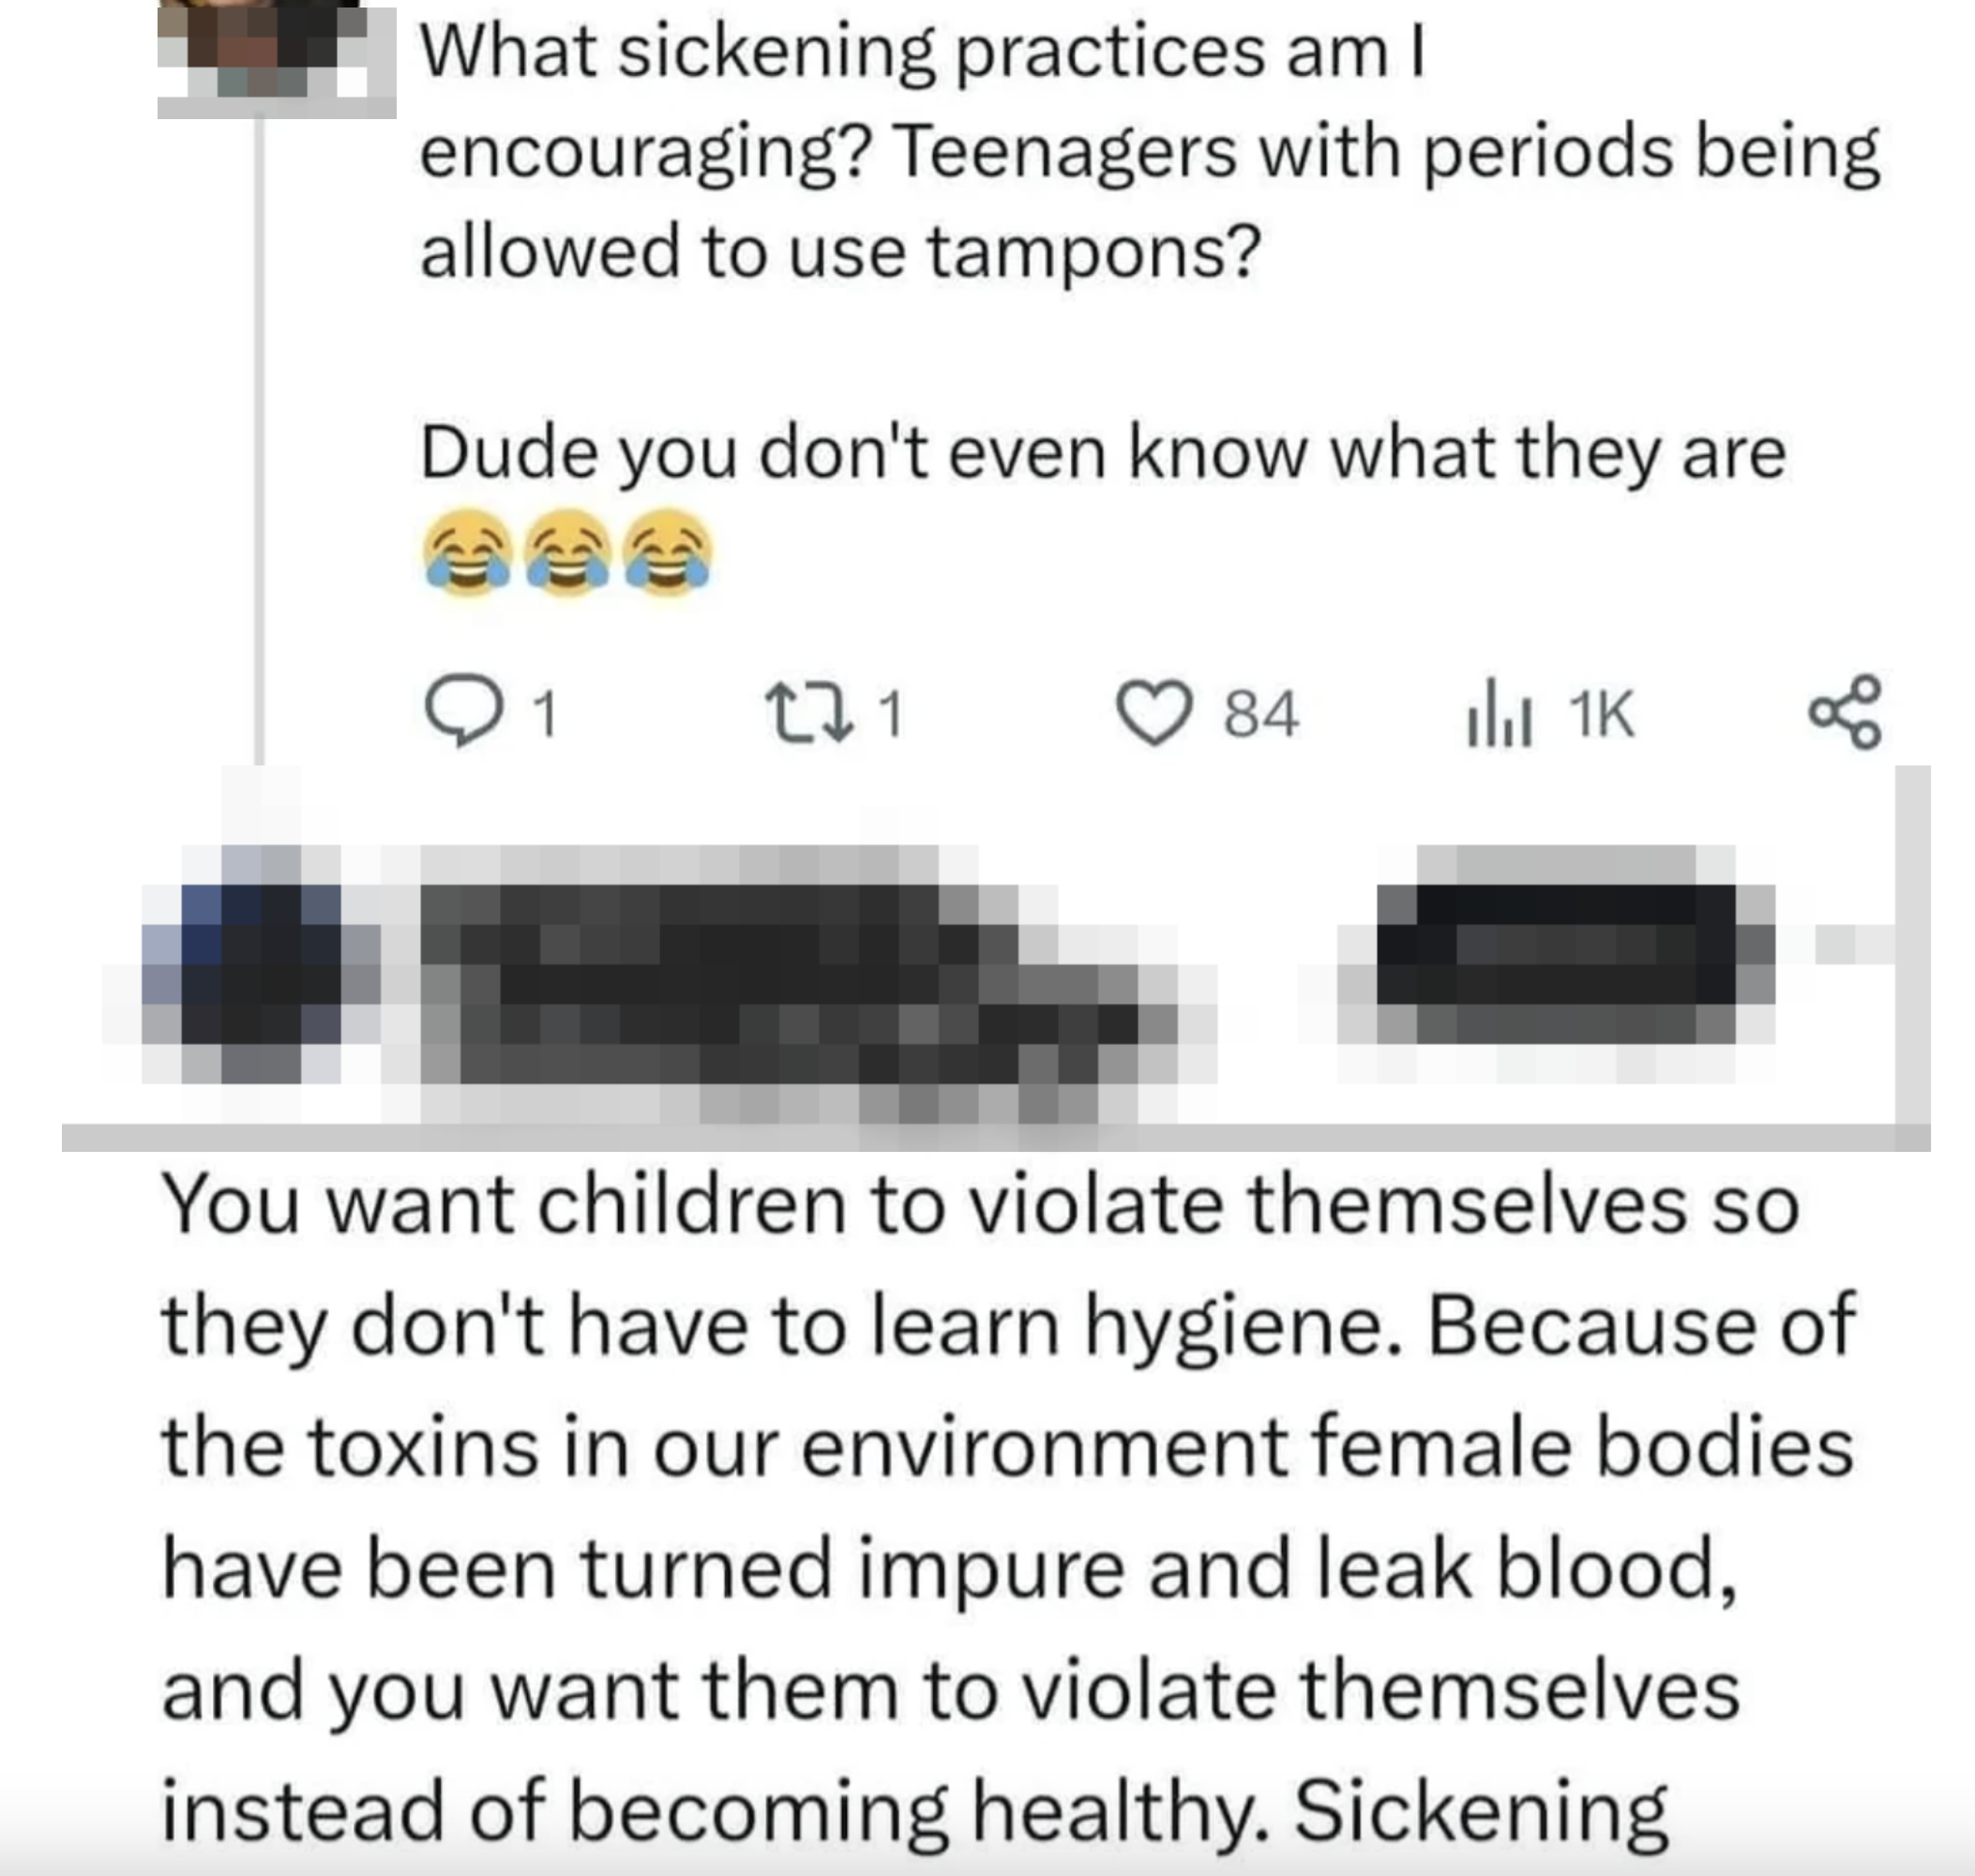 Arguing against teens using tampons: &quot;You want children to violate themselves so they don&#x27;t have to learn hygiene; because of the toxins in our environment female bodies have been turned impure and leak blood&quot;